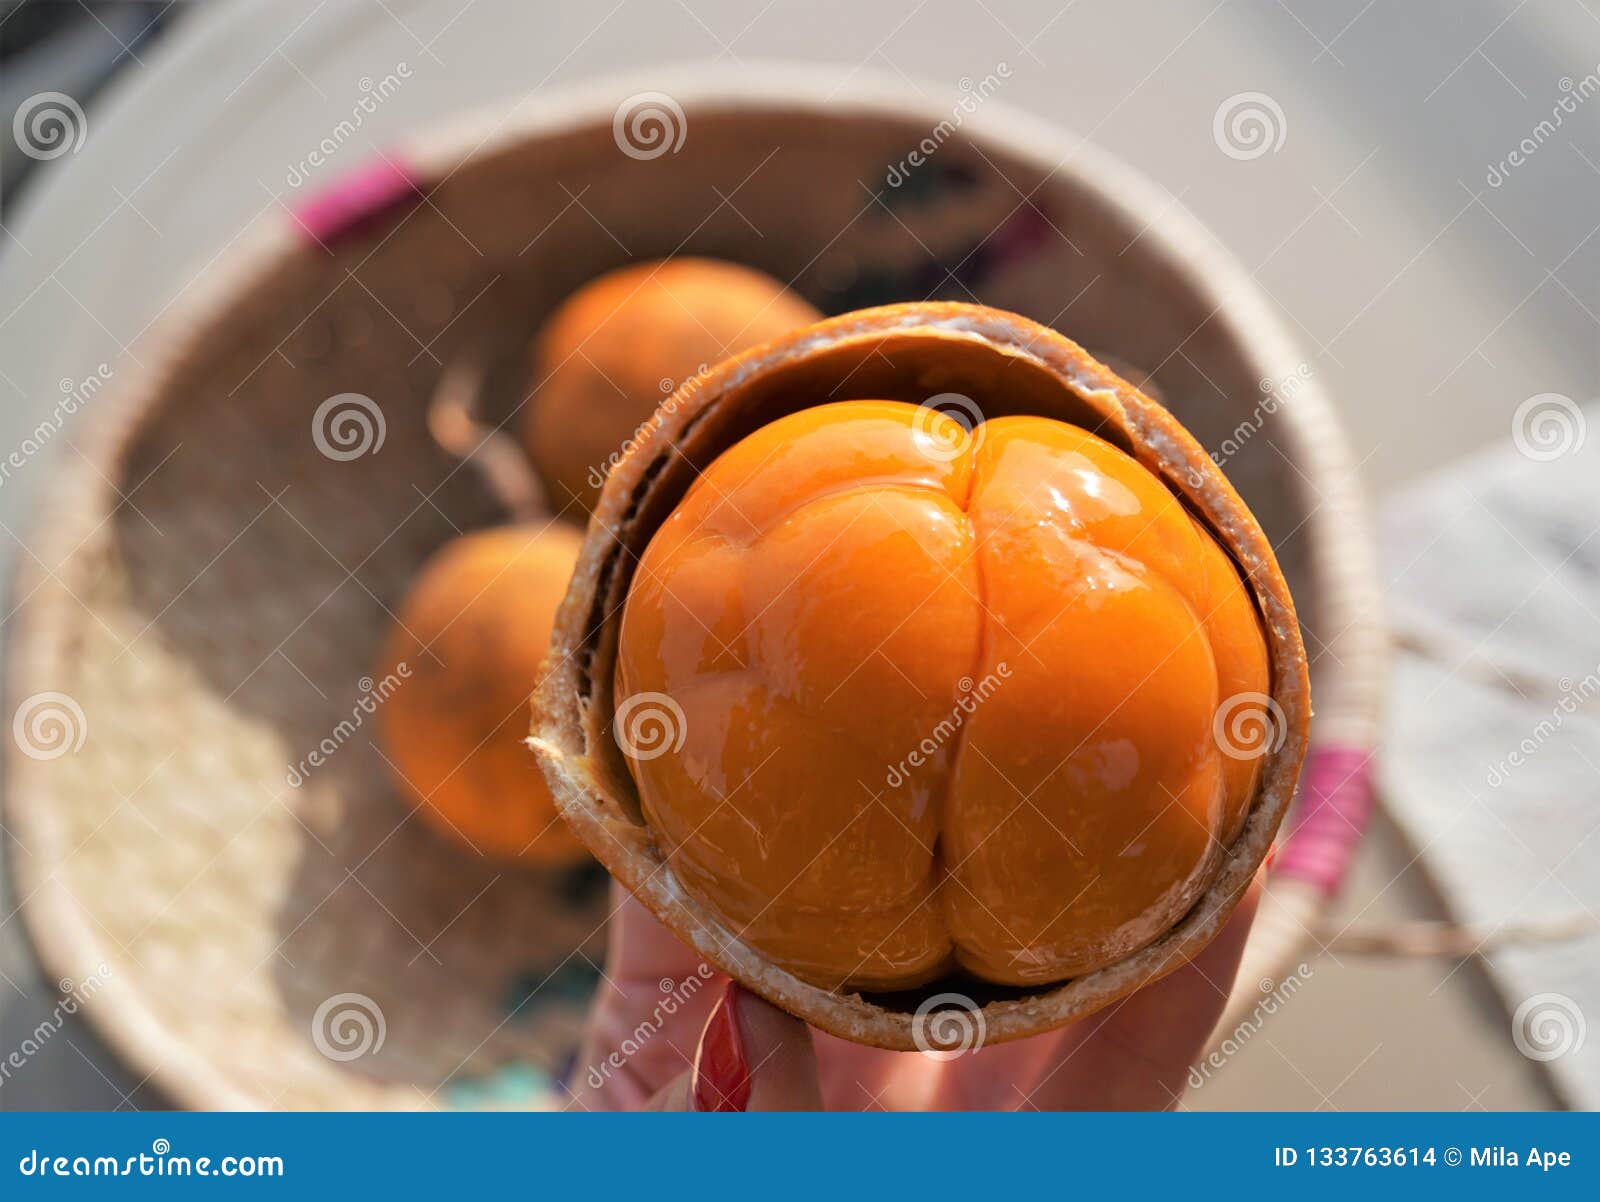 Exotic fruits in africa stock photo. Image of breakfast - 133763614